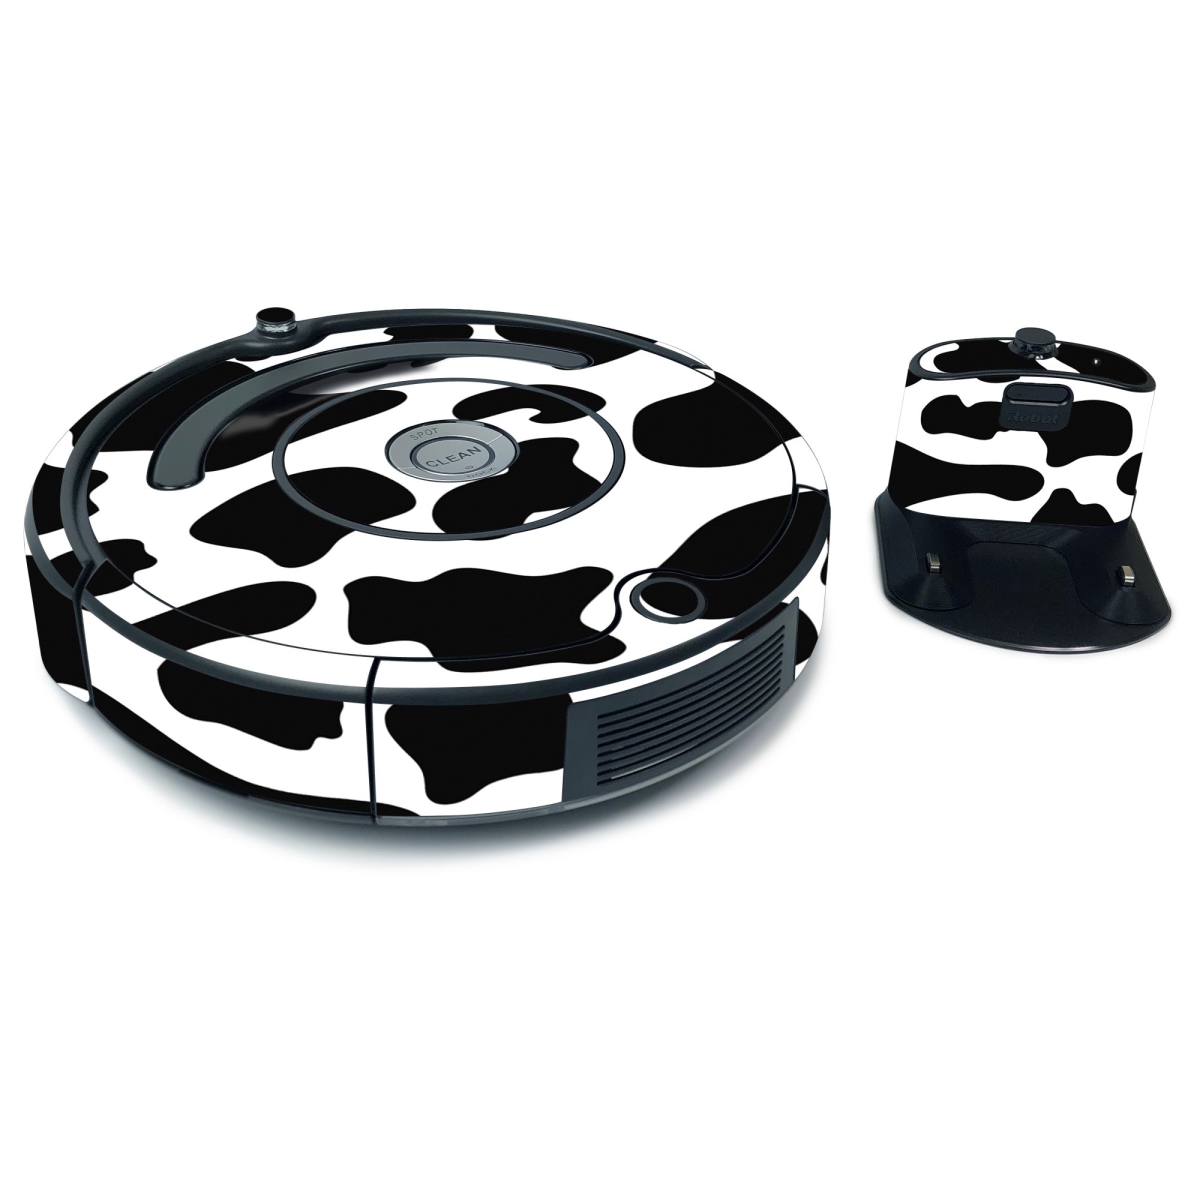 Picture of MightySkins IRRO675-Cow Print Skin for iRobot Roomba 675 Max Coverage - Cow Print